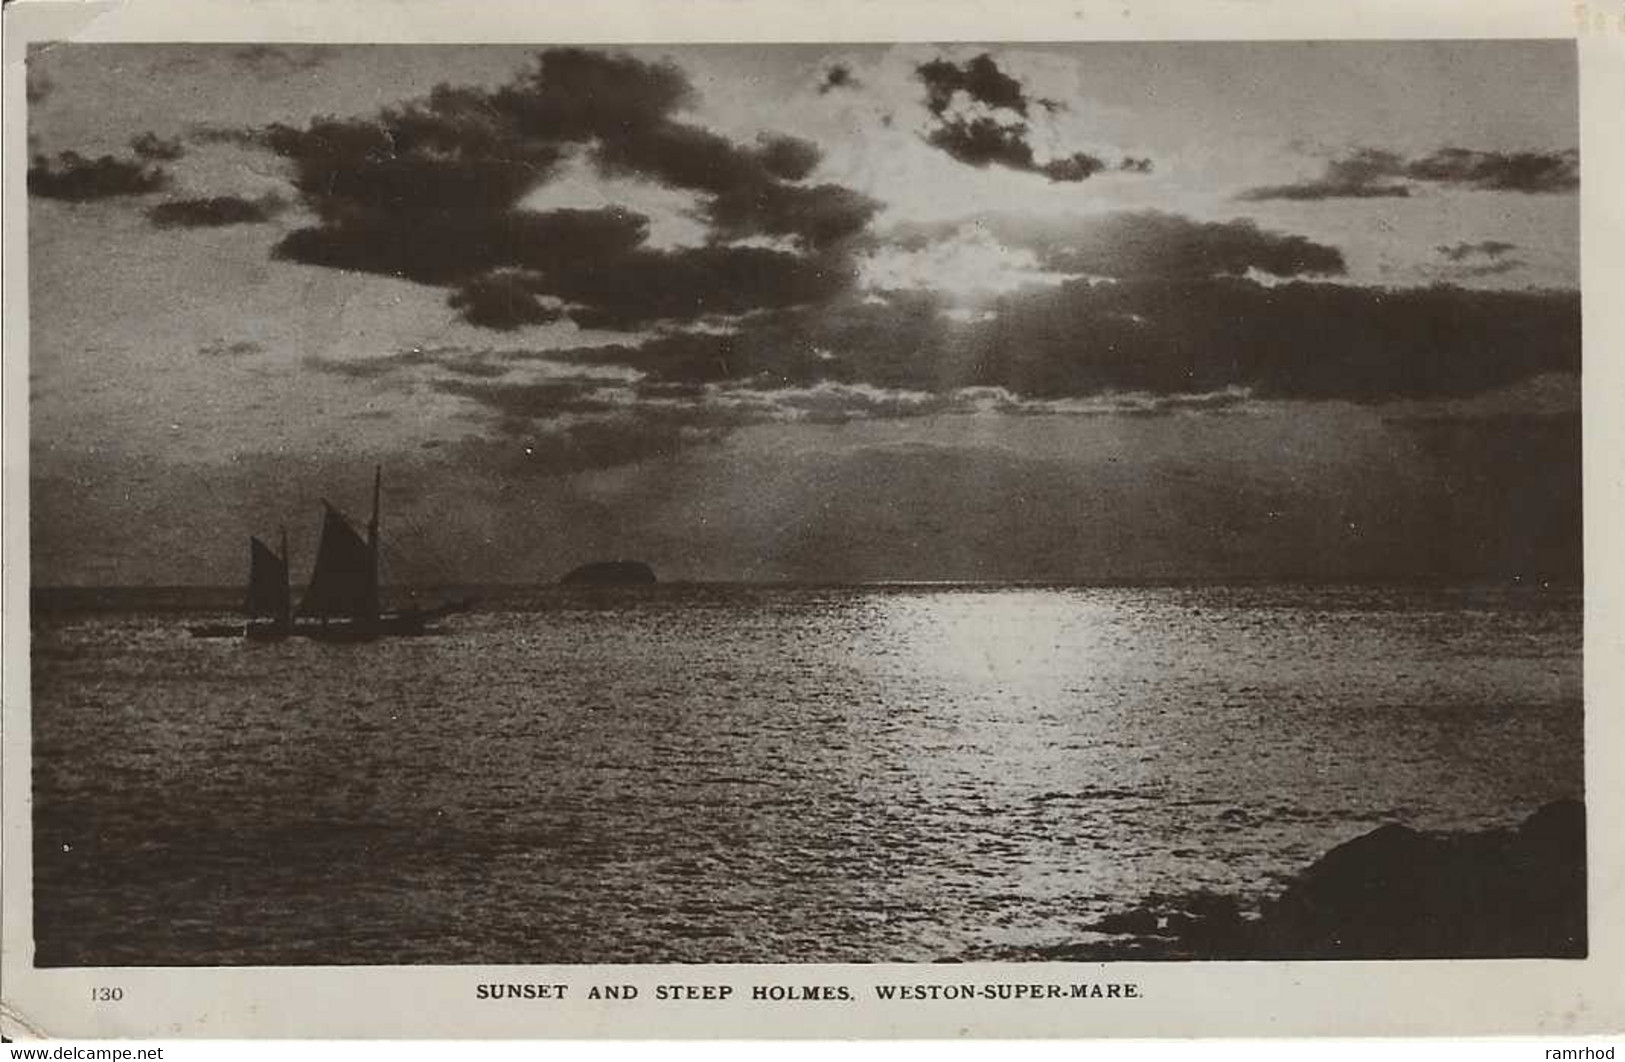 WESTON-SUPER-MARE, Sunset And Steep Holmes (Publisher - IIJ Series) Date - August 1913, Used - Weston-Super-Mare